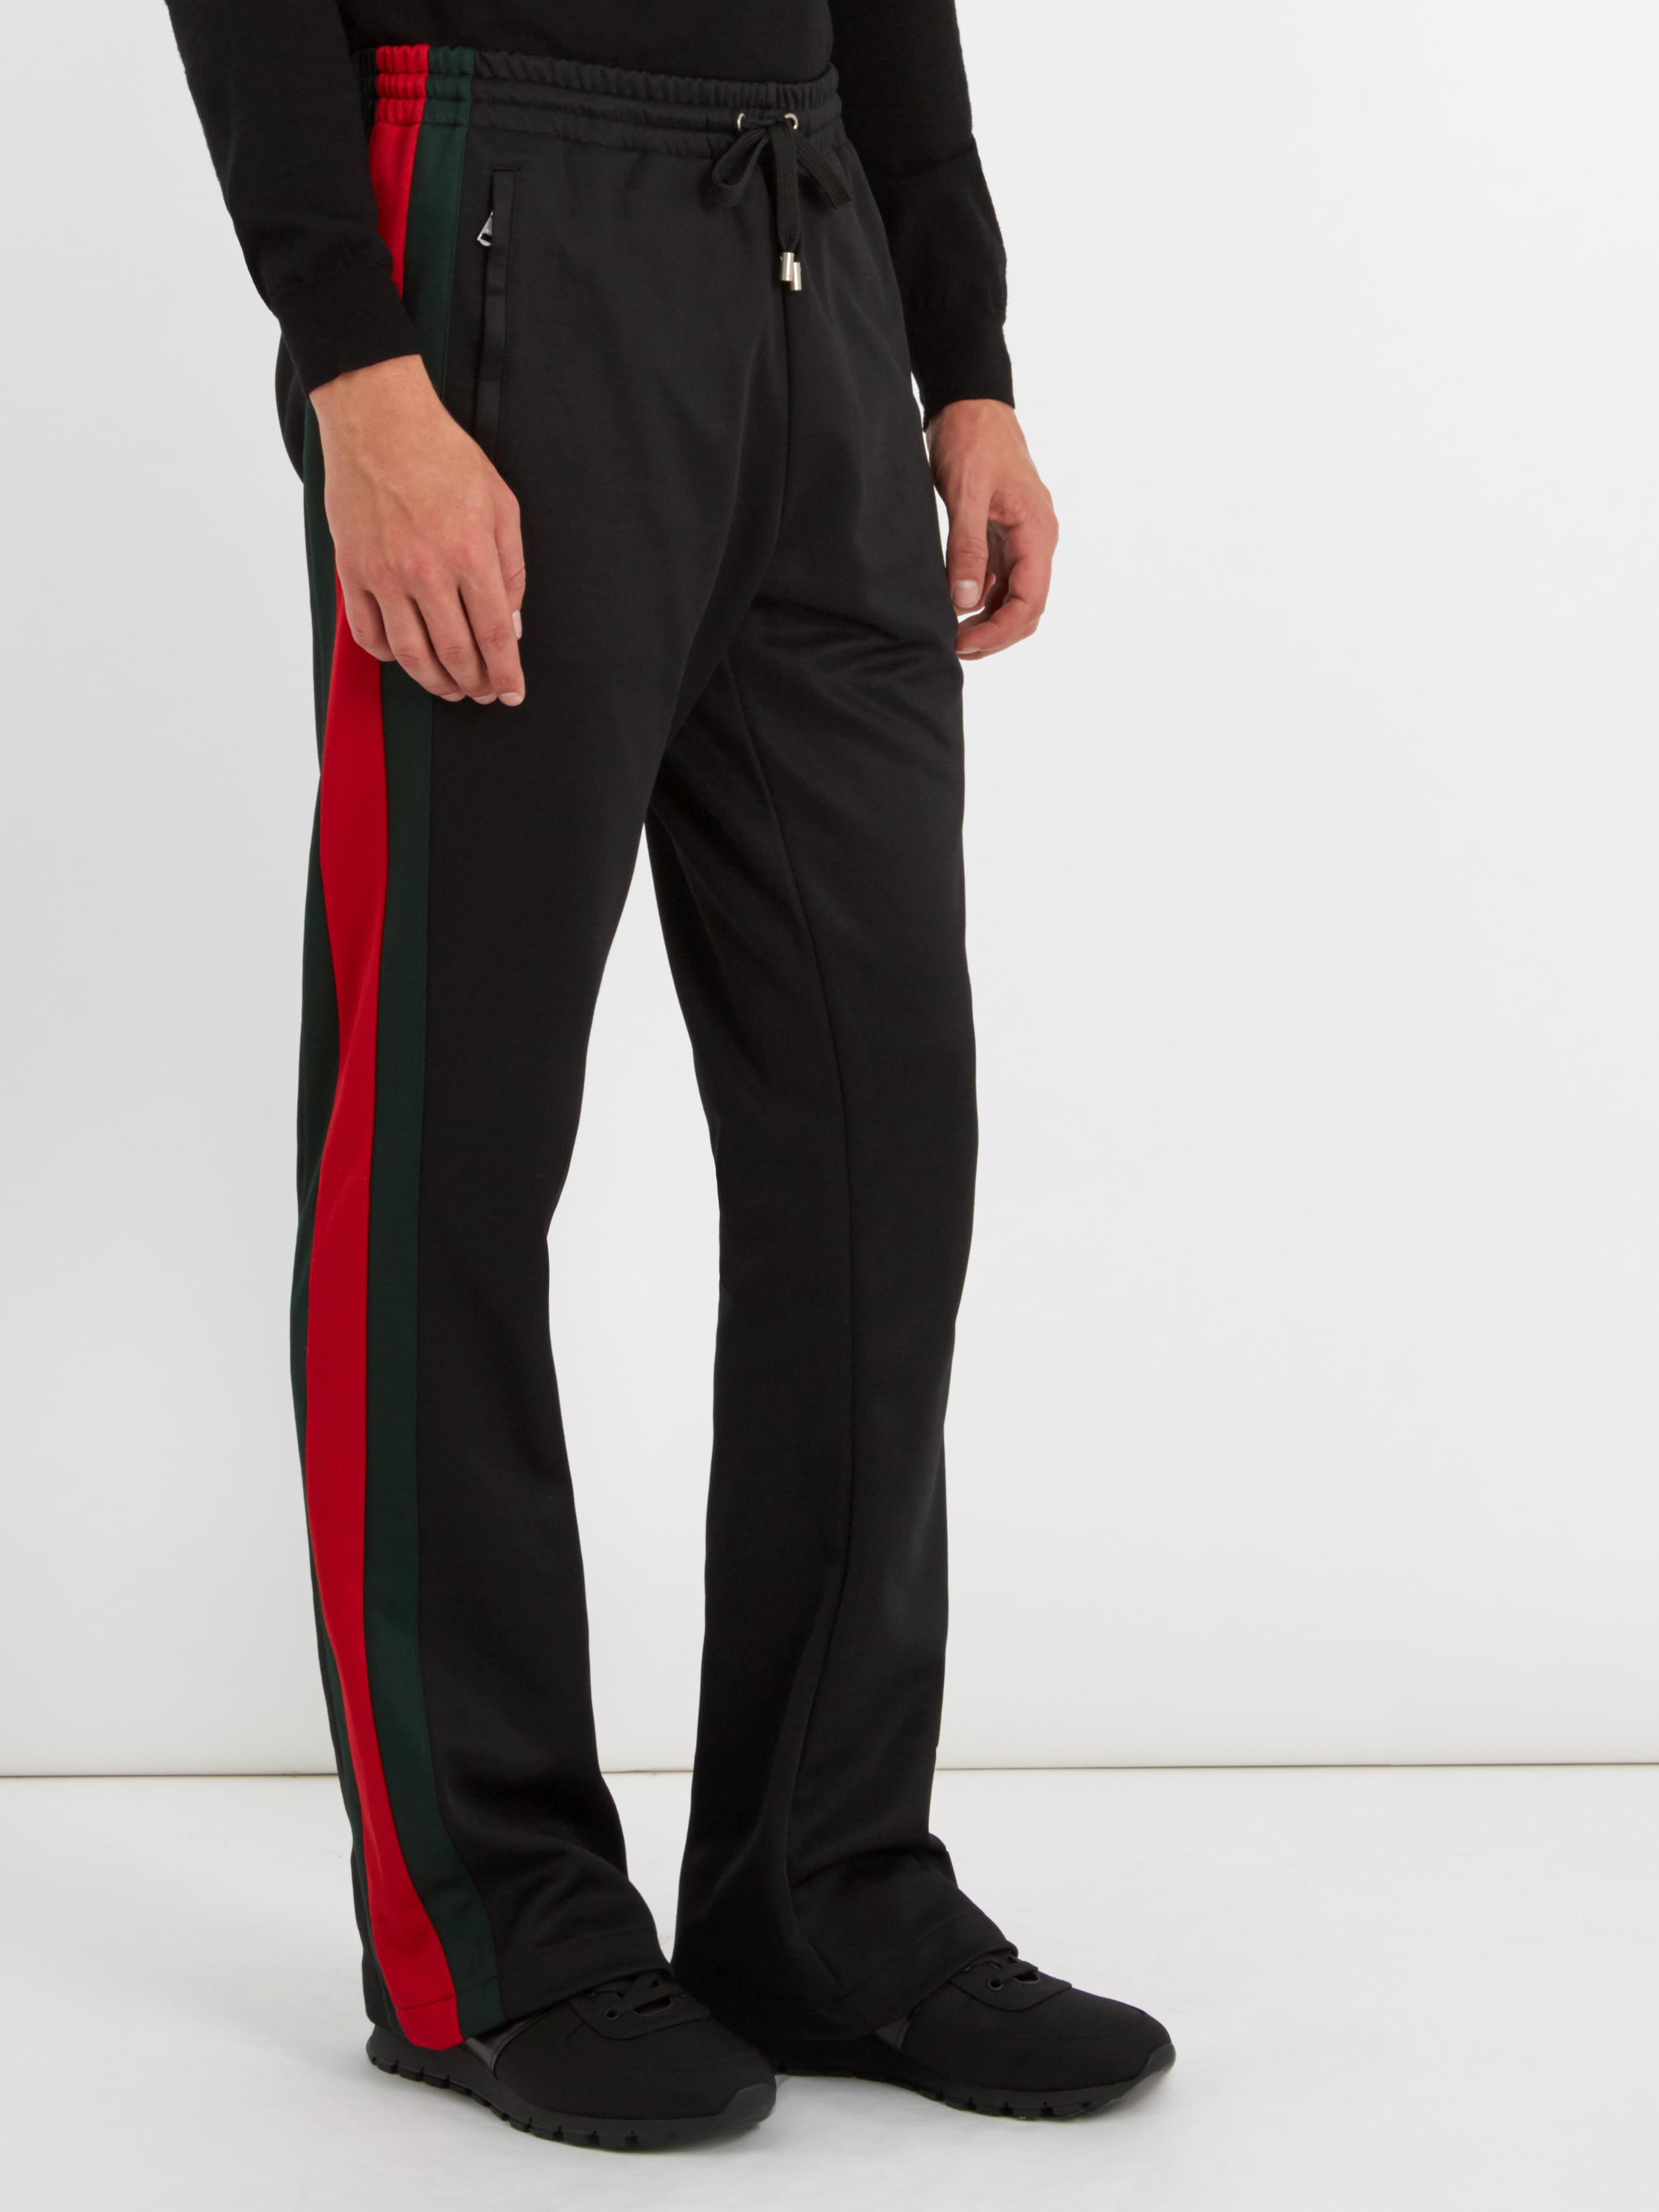 Gucci Synthetic Web-striped Mid-rise Track Pants in Black for Men - Lyst